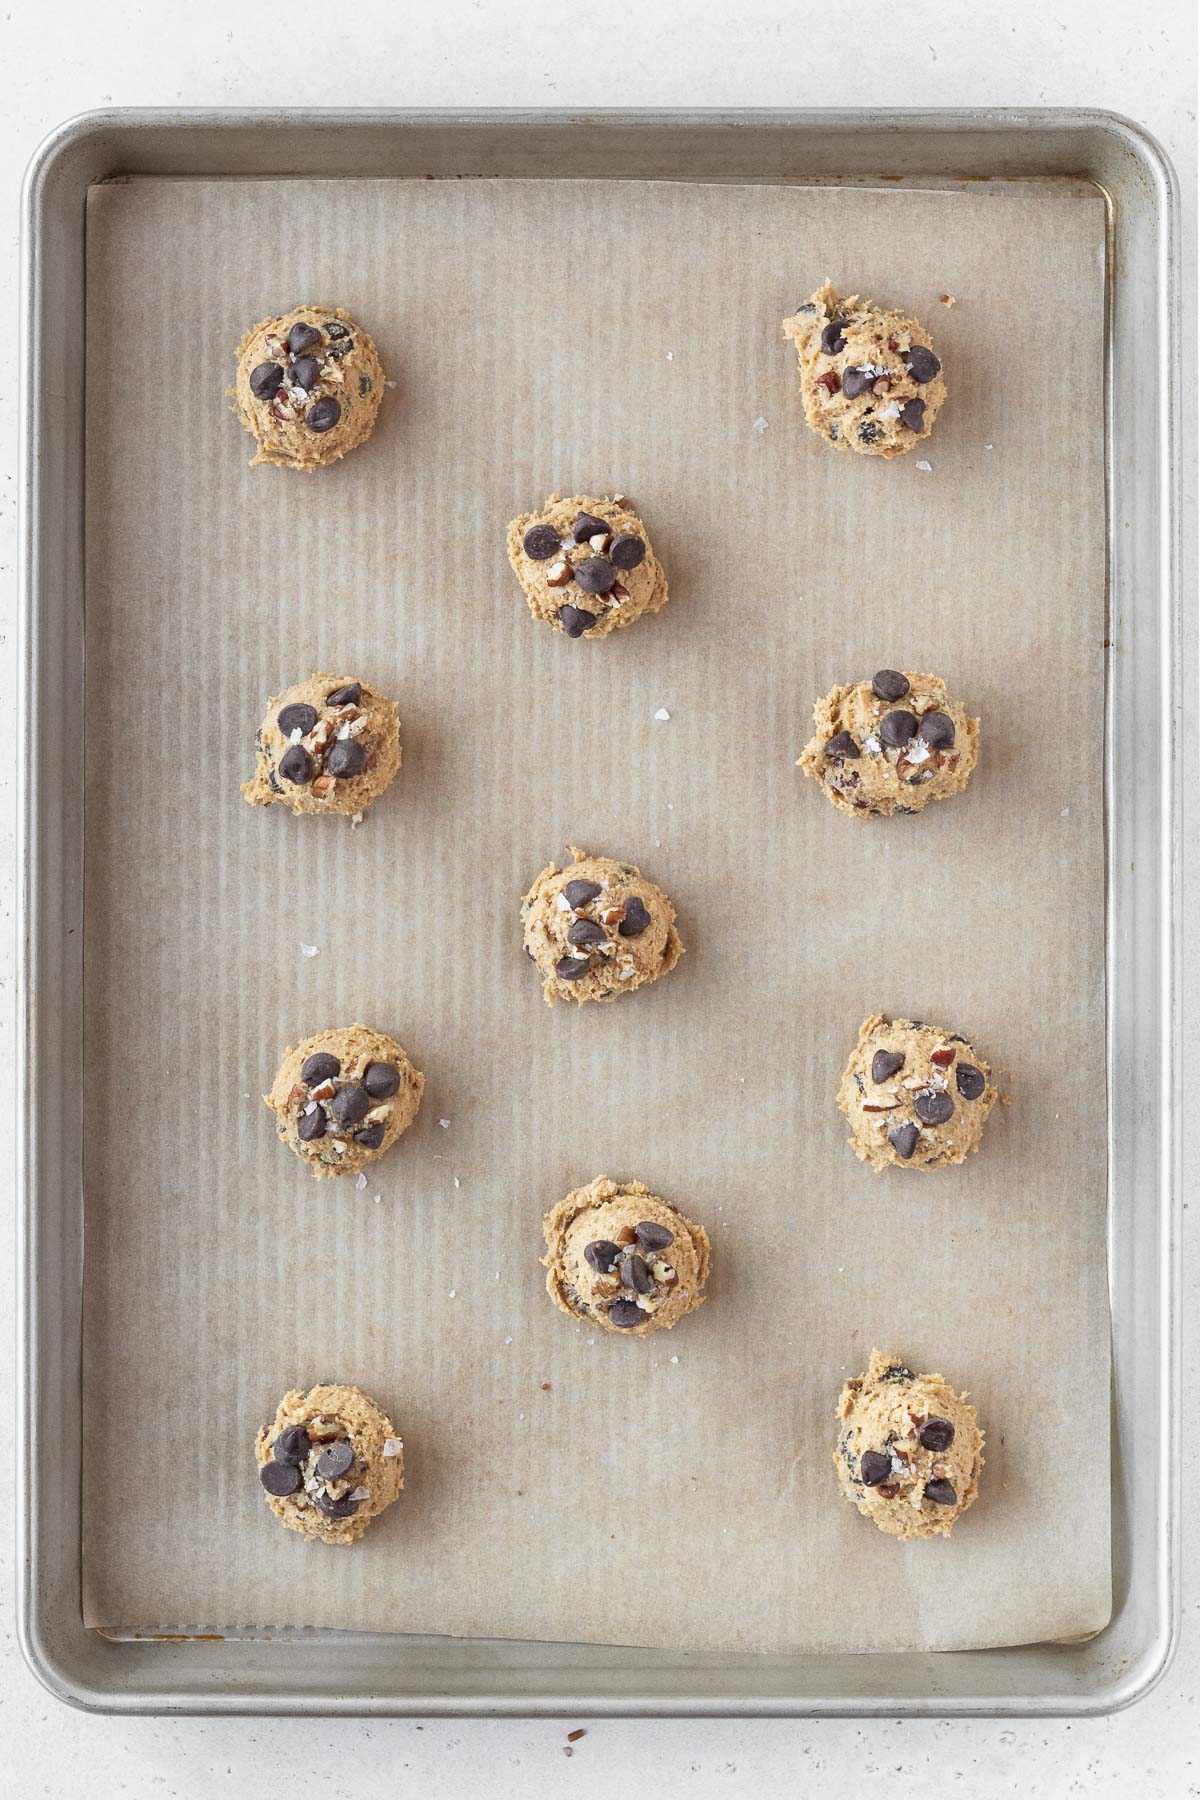 balls of oat flour chocolate chip cookie dough on a parchment lined baking sheet.